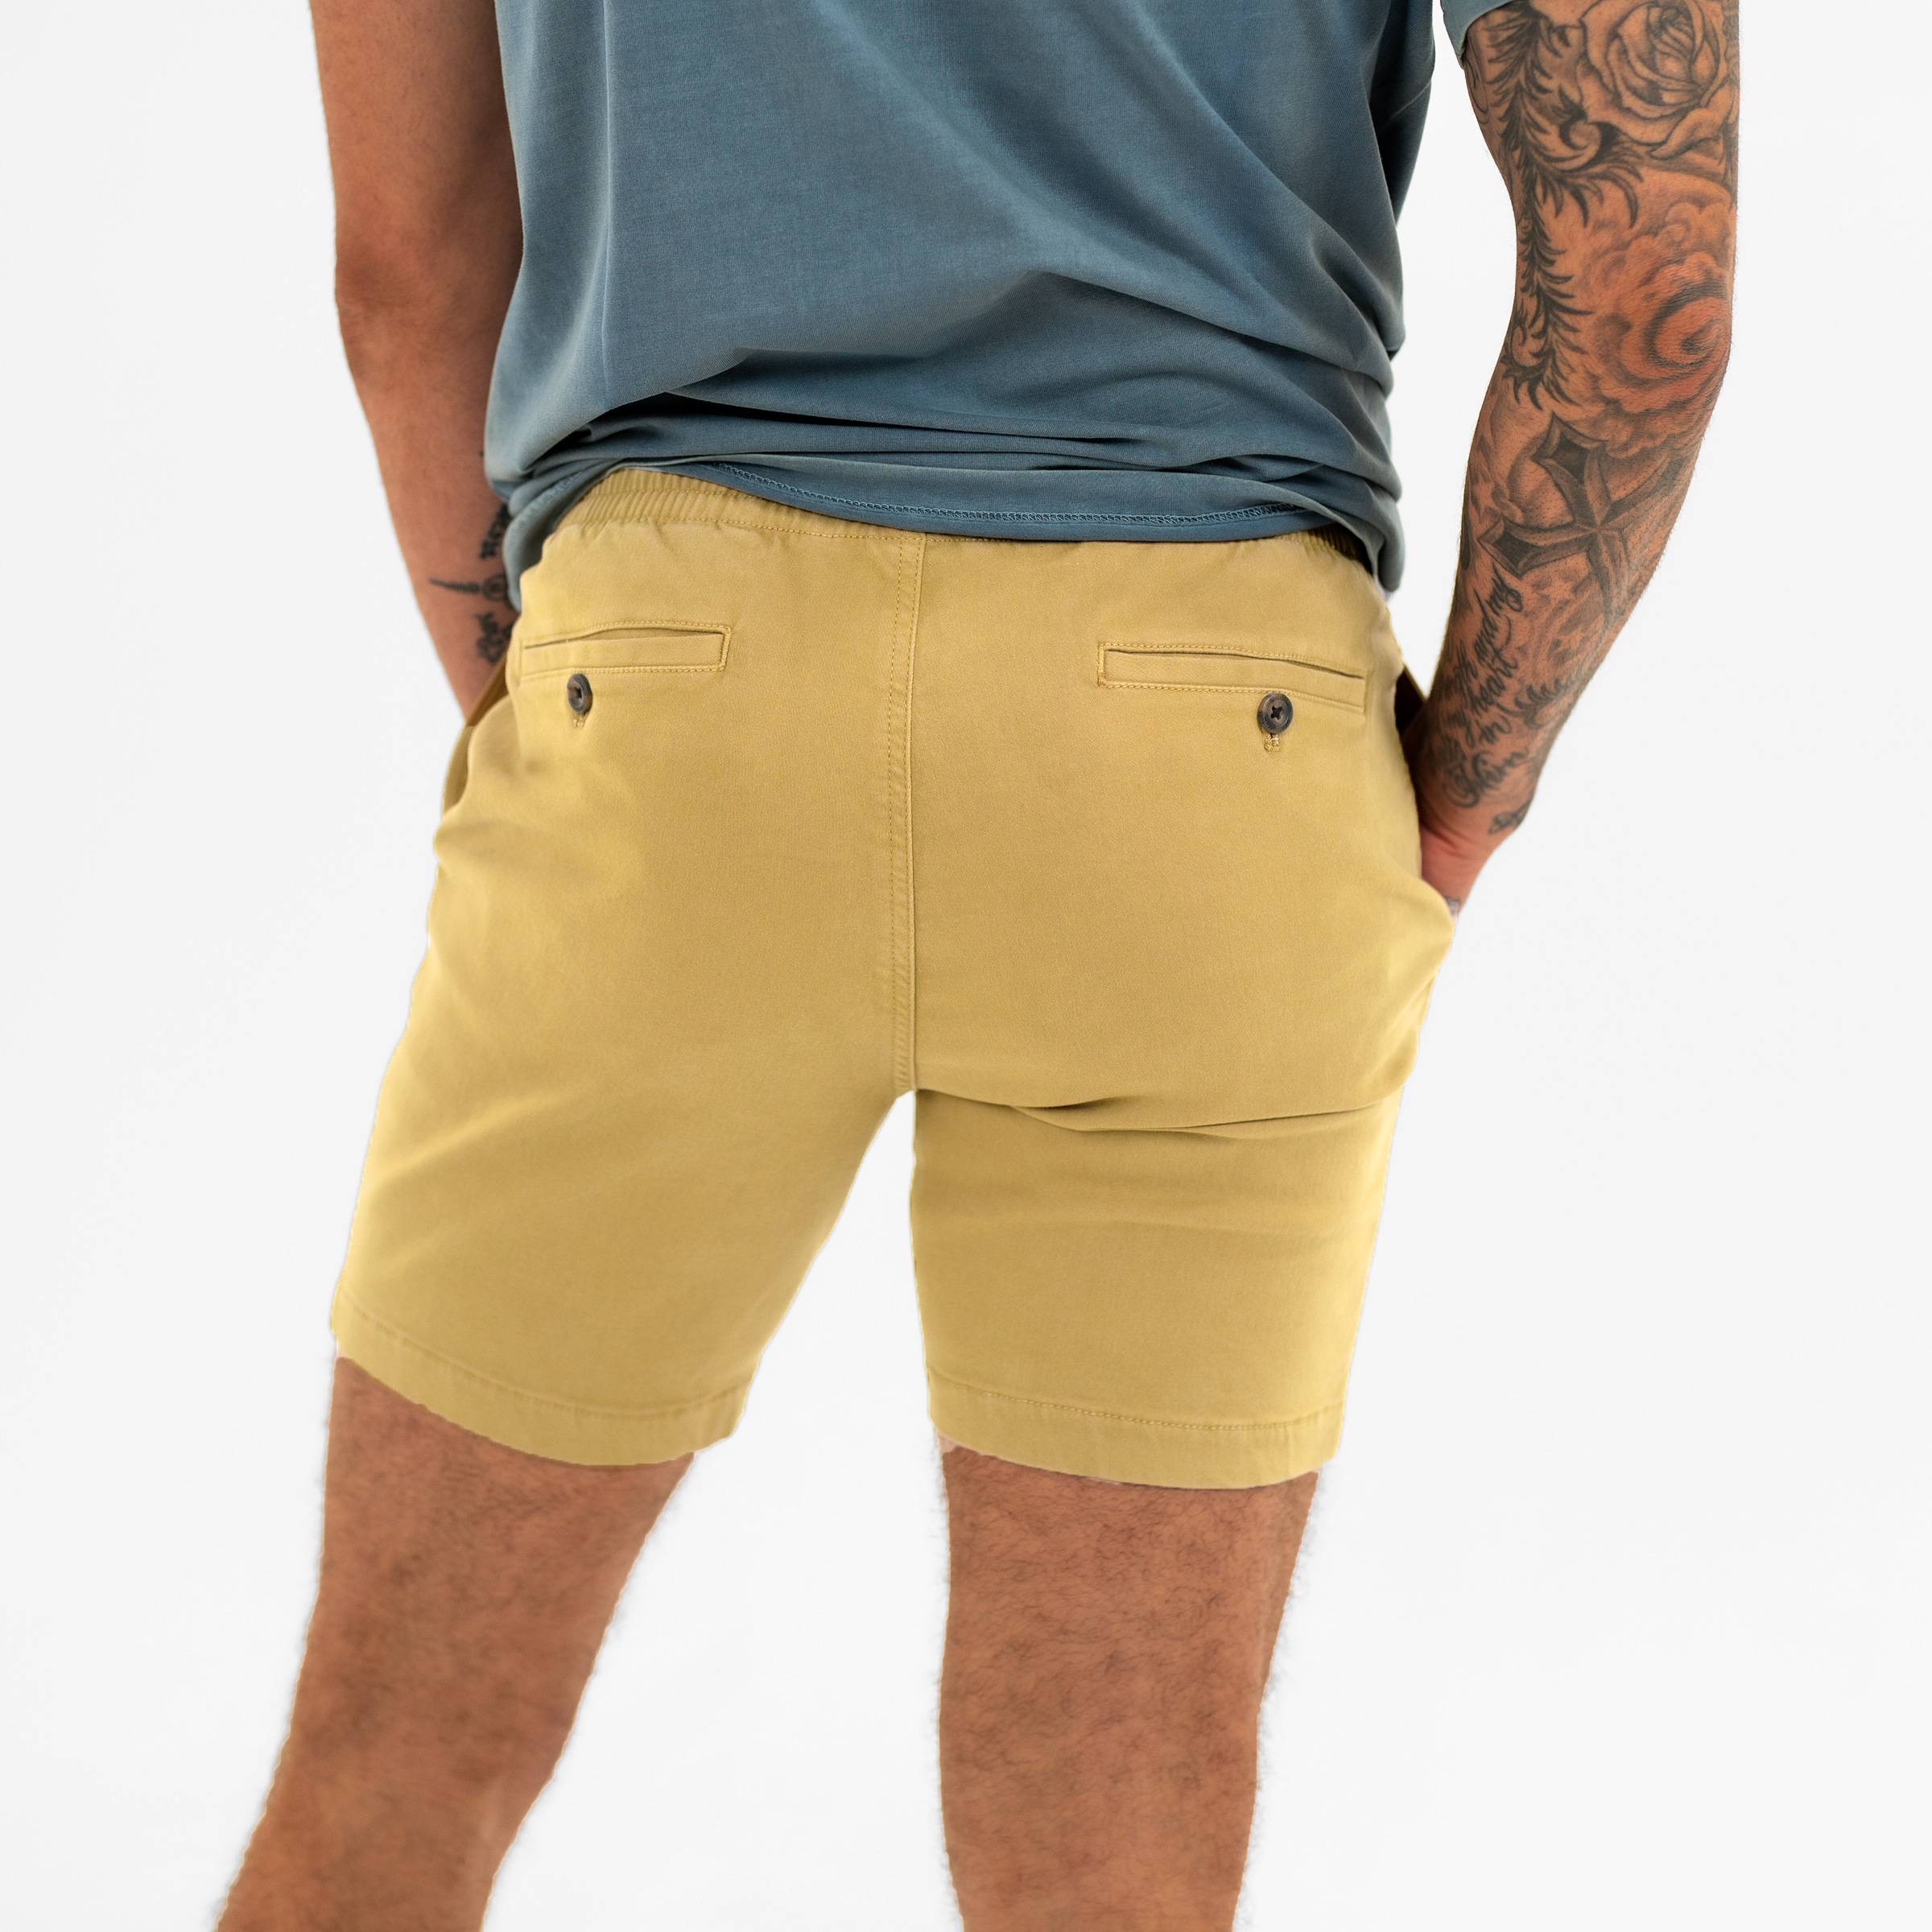 Alto Short 7" inseam in Khaki back on model with elastic waistband and two welt pocket with horn buttons